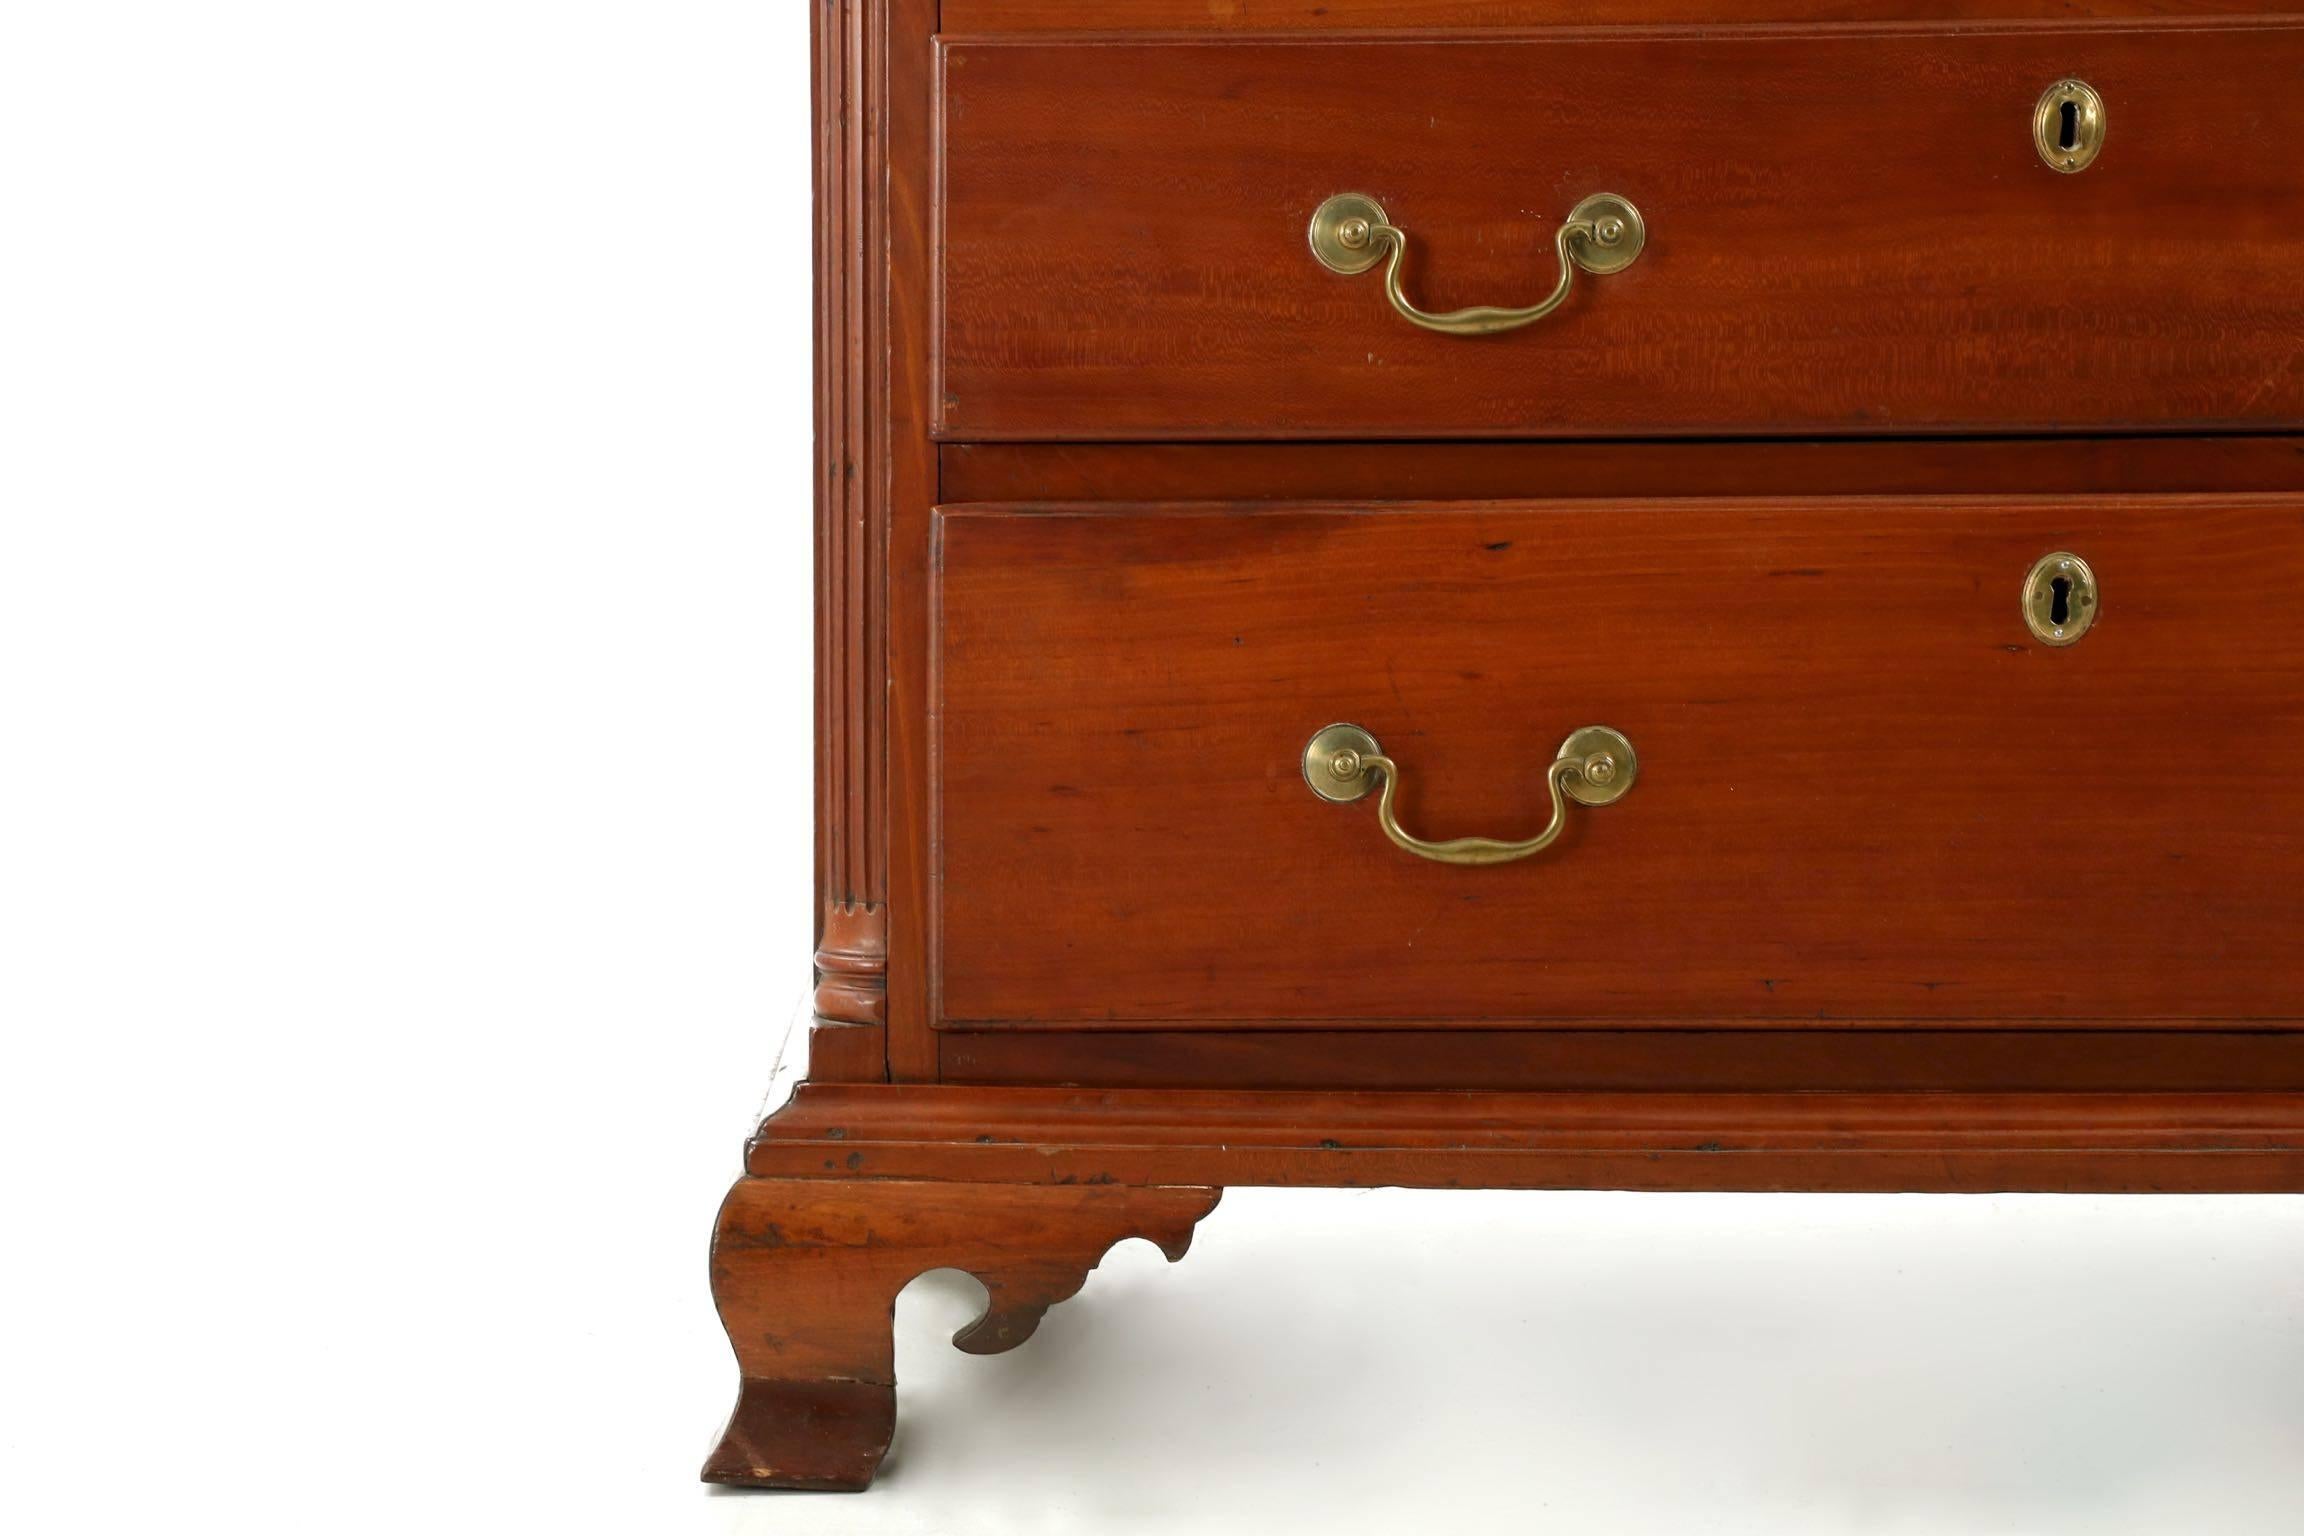 Late 18th Century Fine American Chippendale Cherry Chest of Drawers, Pennsylvania, circa 1770